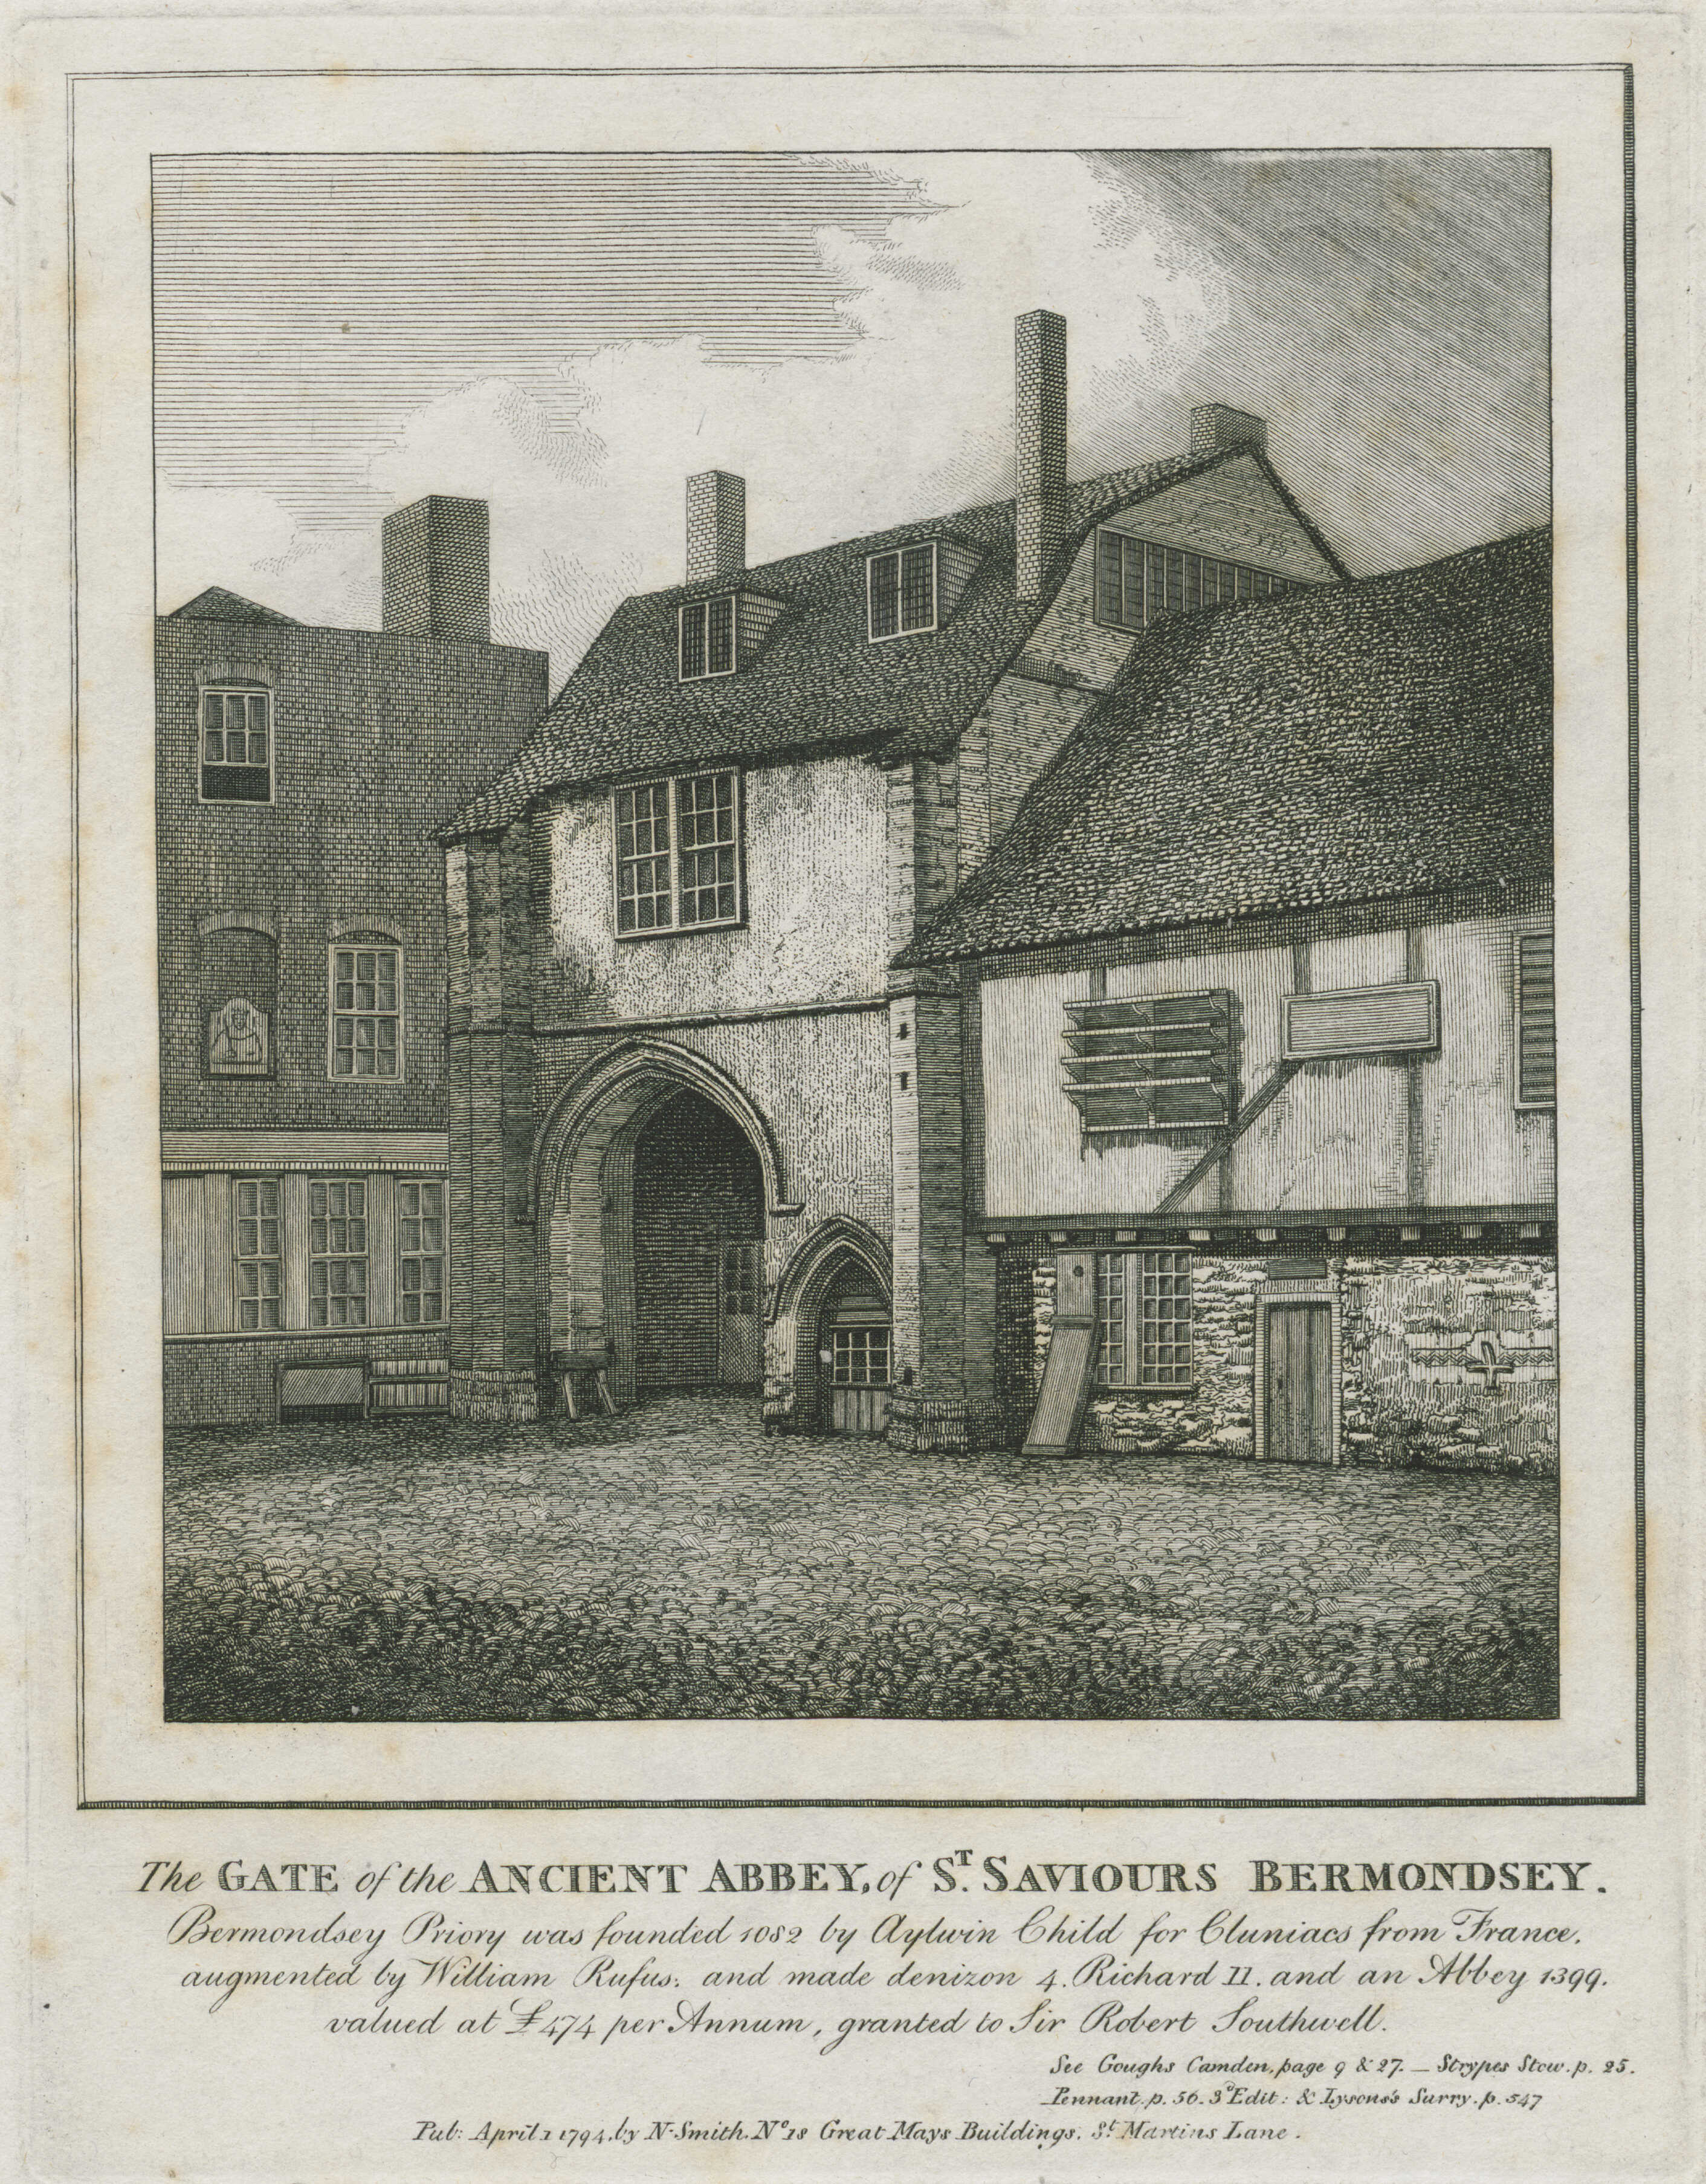 49-the-gate-of-the-ancient-abbey-of-st-saviours-bermondsey